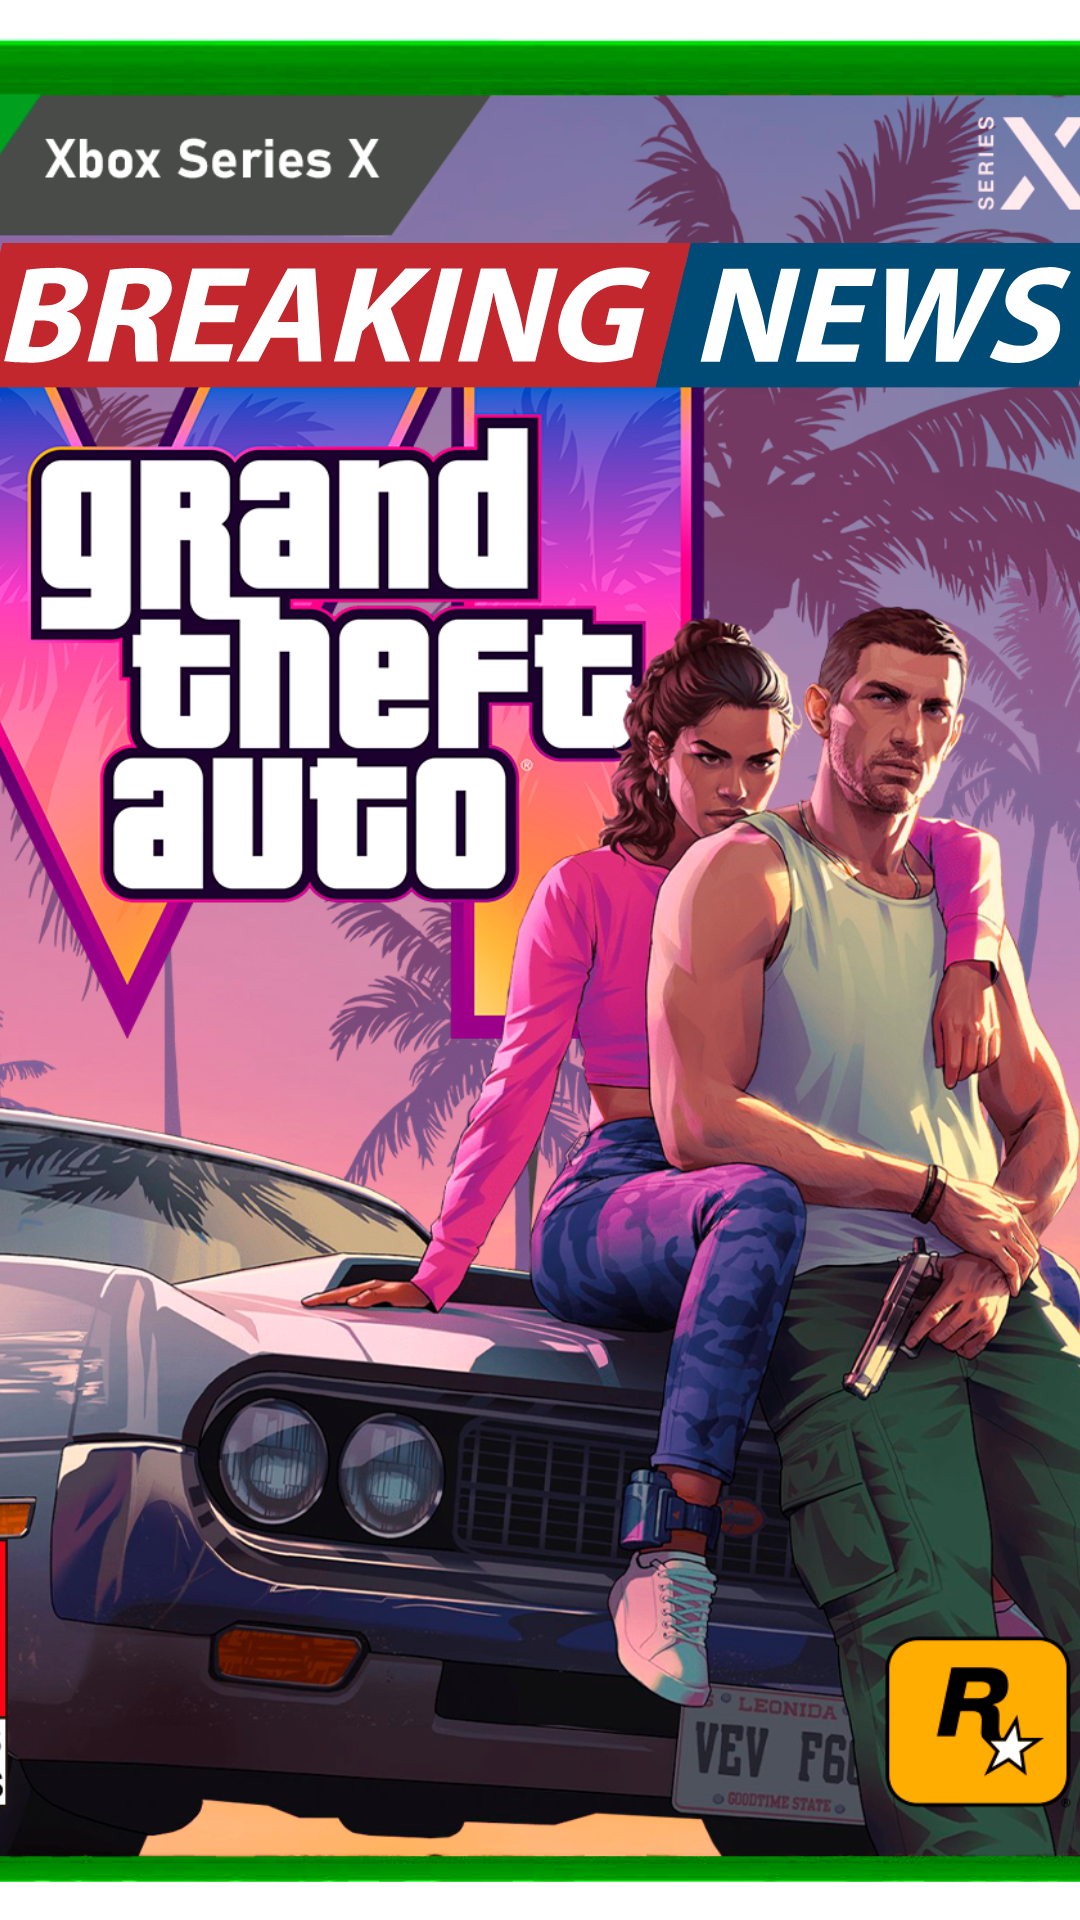 LifeGetsEasy Acquires First Exclusive Selling Rights for GTA VI